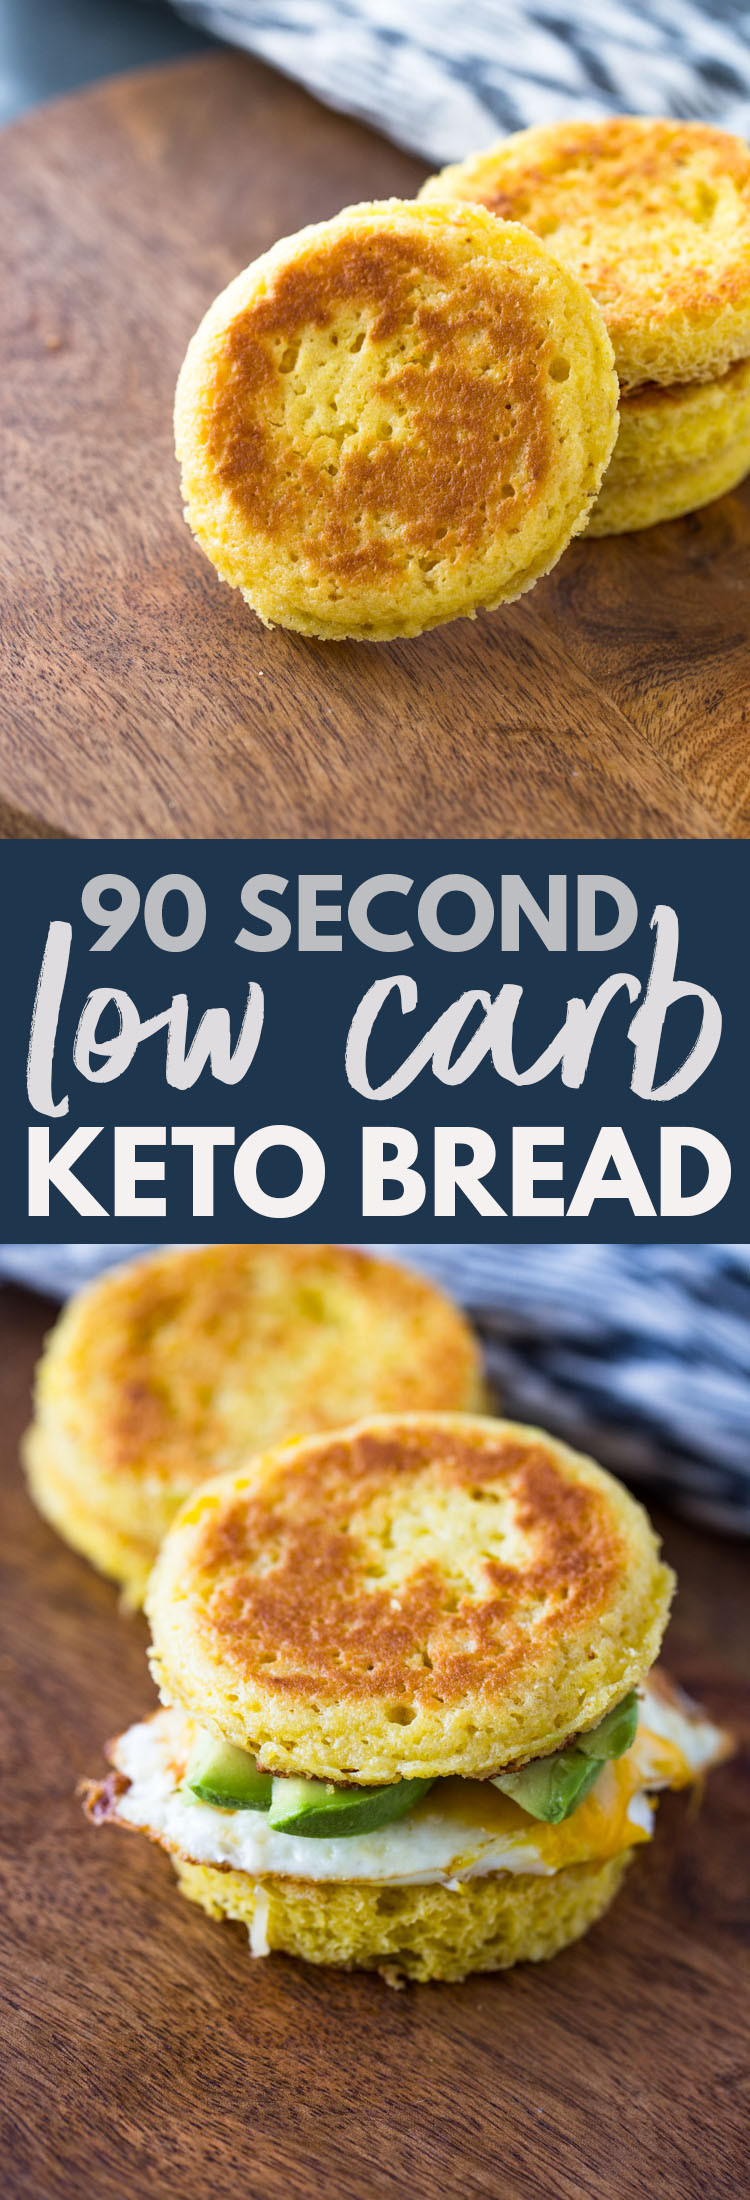 90 Second Keto Bread In A Mug Video
 90 Second Microwavable Low Carb Keto Bread